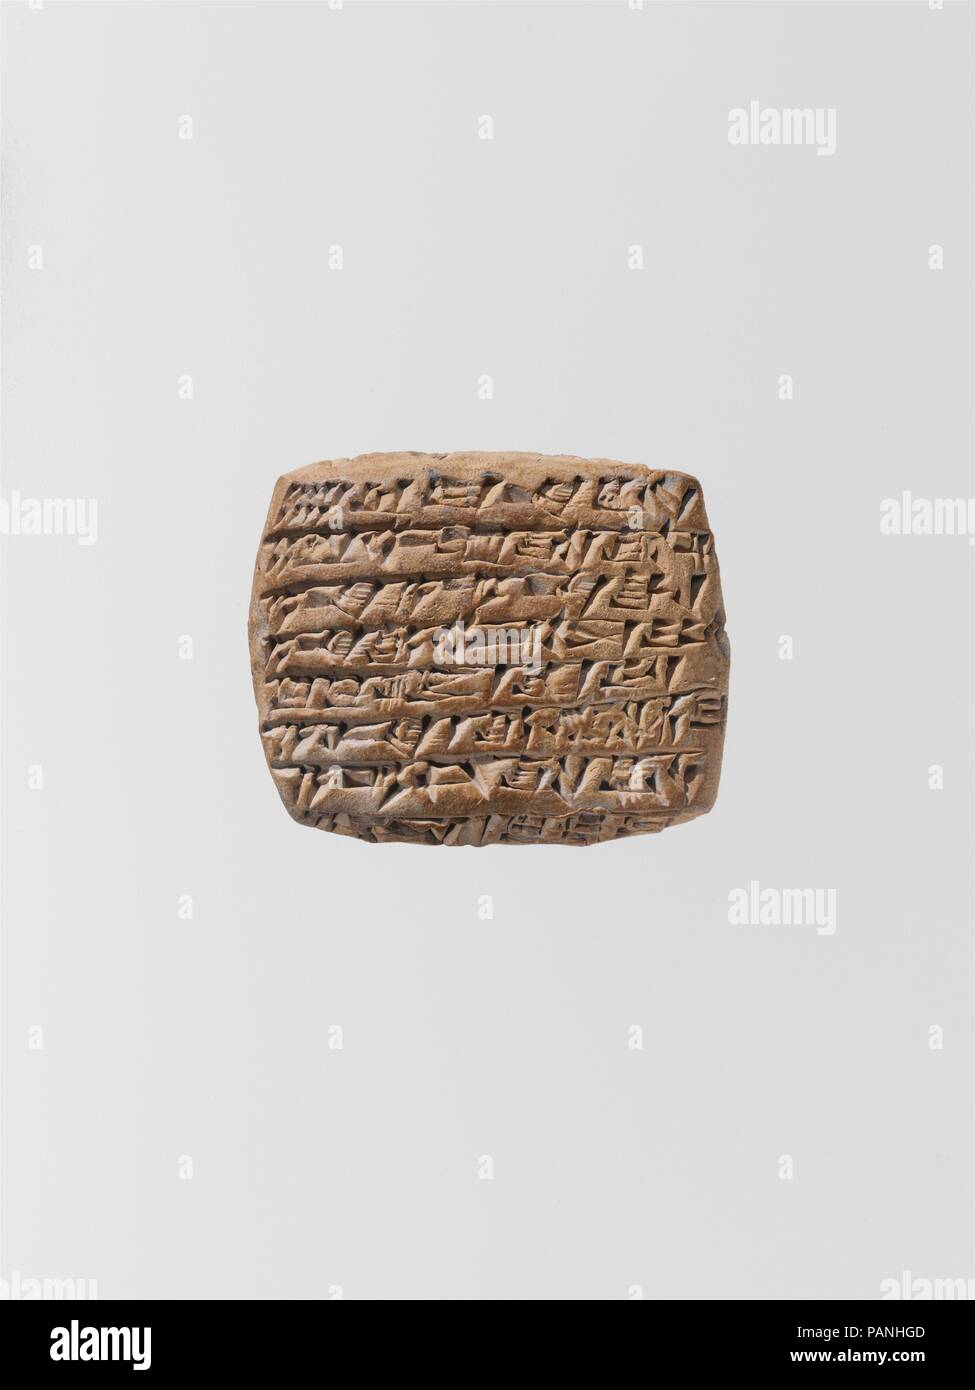 Cuneiform tablet: quittance. Culture: Old Assyrian Trading Colony. Dimensions: 3.7 x 4.5 x 1.4 cm (1 1/2 x 1 3/4 x 1/2 in.). Date: ca. 20th-19th century B.C.. Museum: Metropolitan Museum of Art, New York, USA. Stock Photo